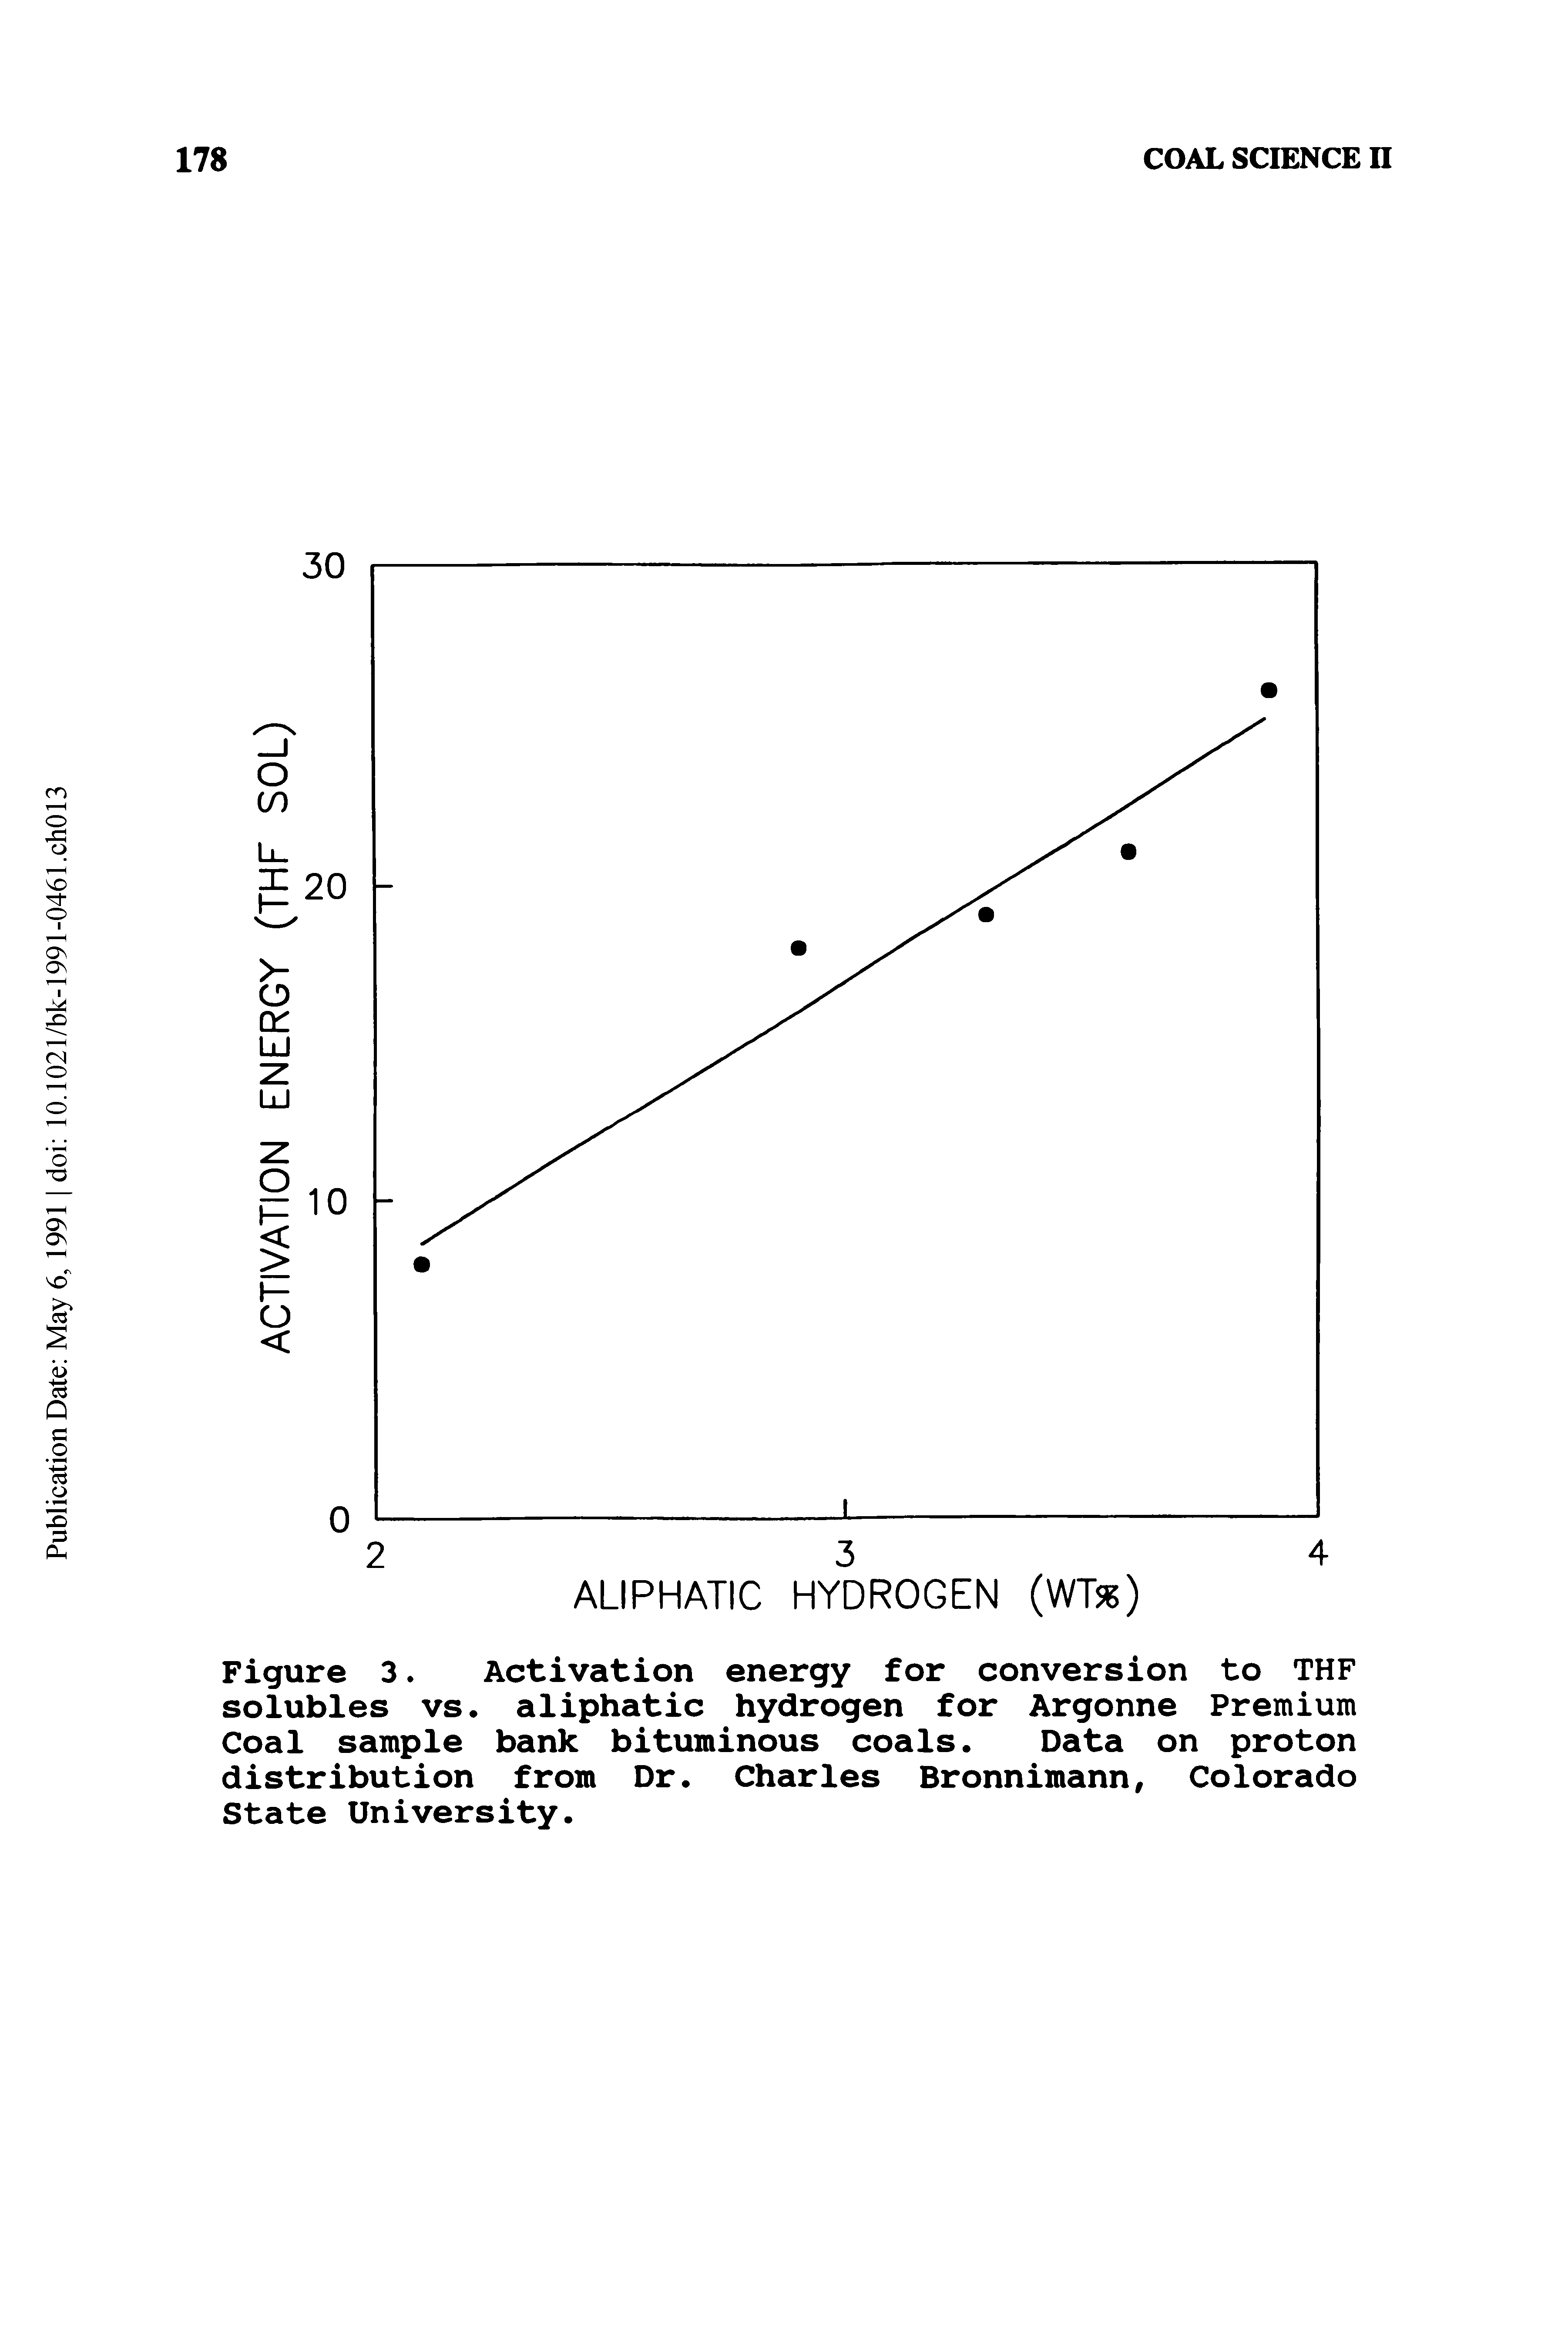 Figure 3. Activation energy for conversion to THF solubles vs. aliphatic hydrogen for Argonne Premium Coal sample bank bituminous coals. Data on proton distribution from Dr. Charles Bronnimann, Colorado State University.